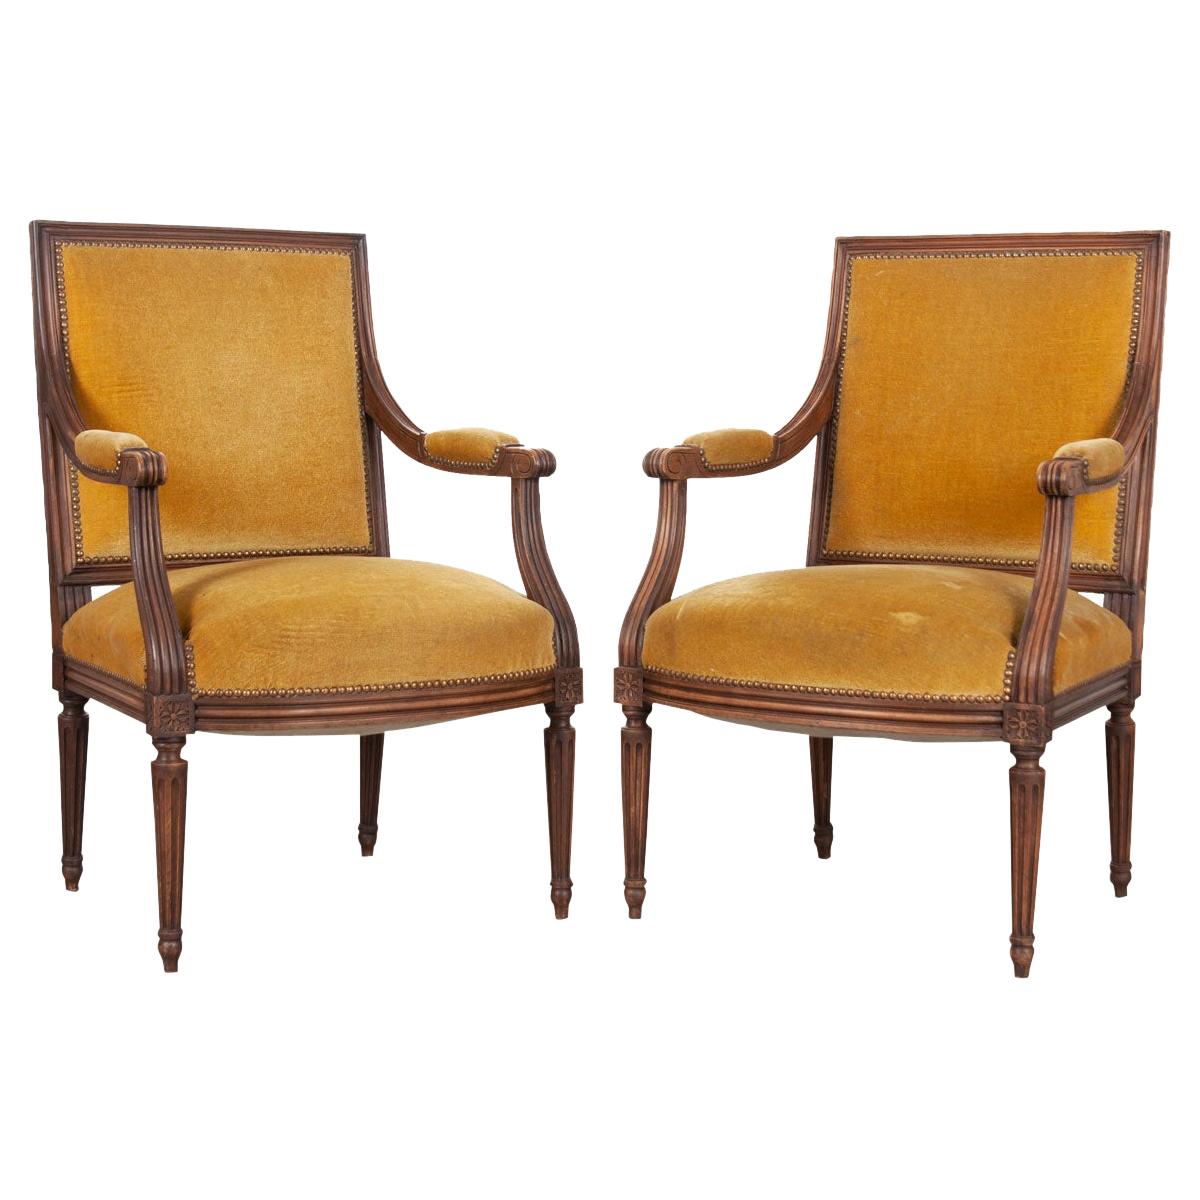 Pair of French 19th Century Louis XVI-Style Fauteuils